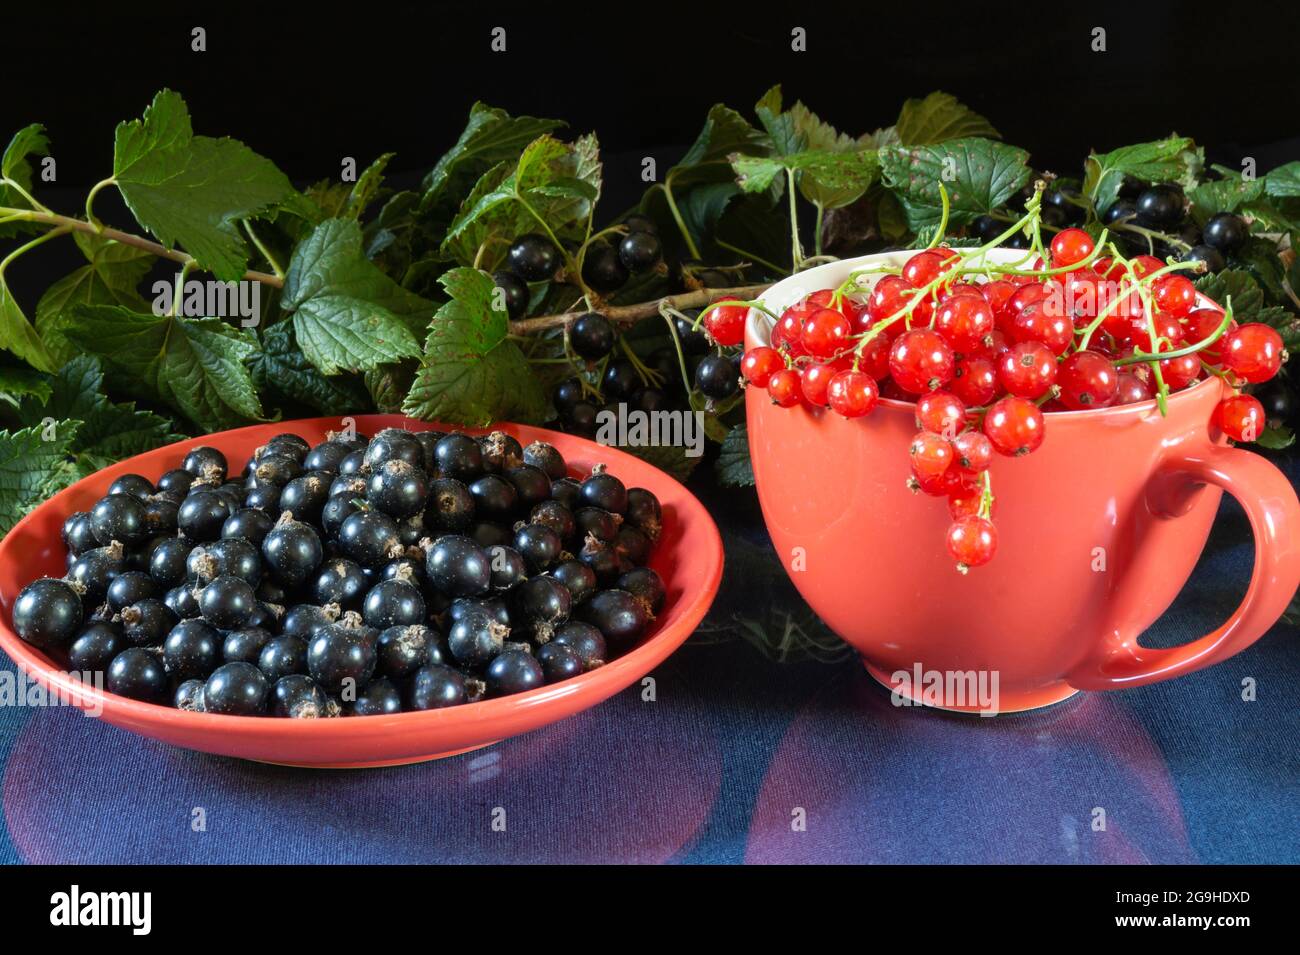 Still life with red and black currants on the table. Food products on a black background Stock Photo